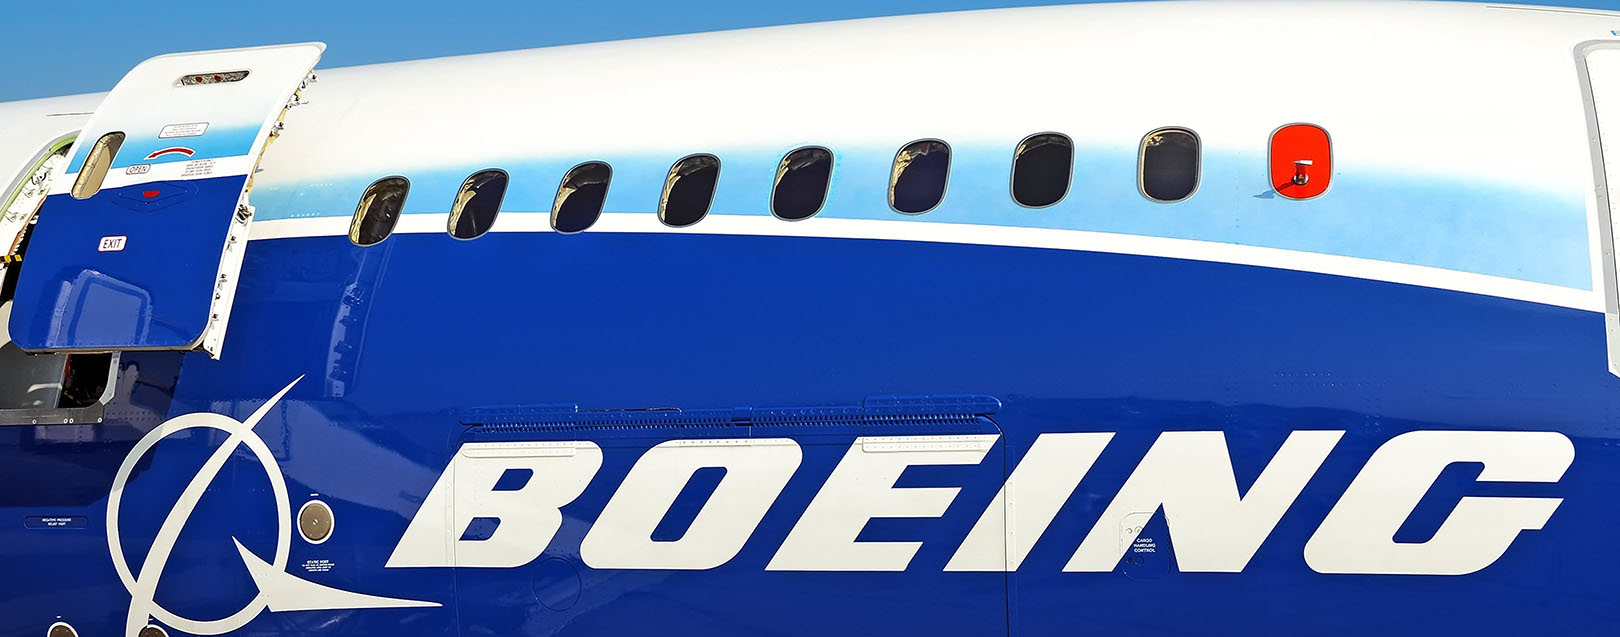 Iran signs $16.6 bn deal with Boeing to buy 80 planes